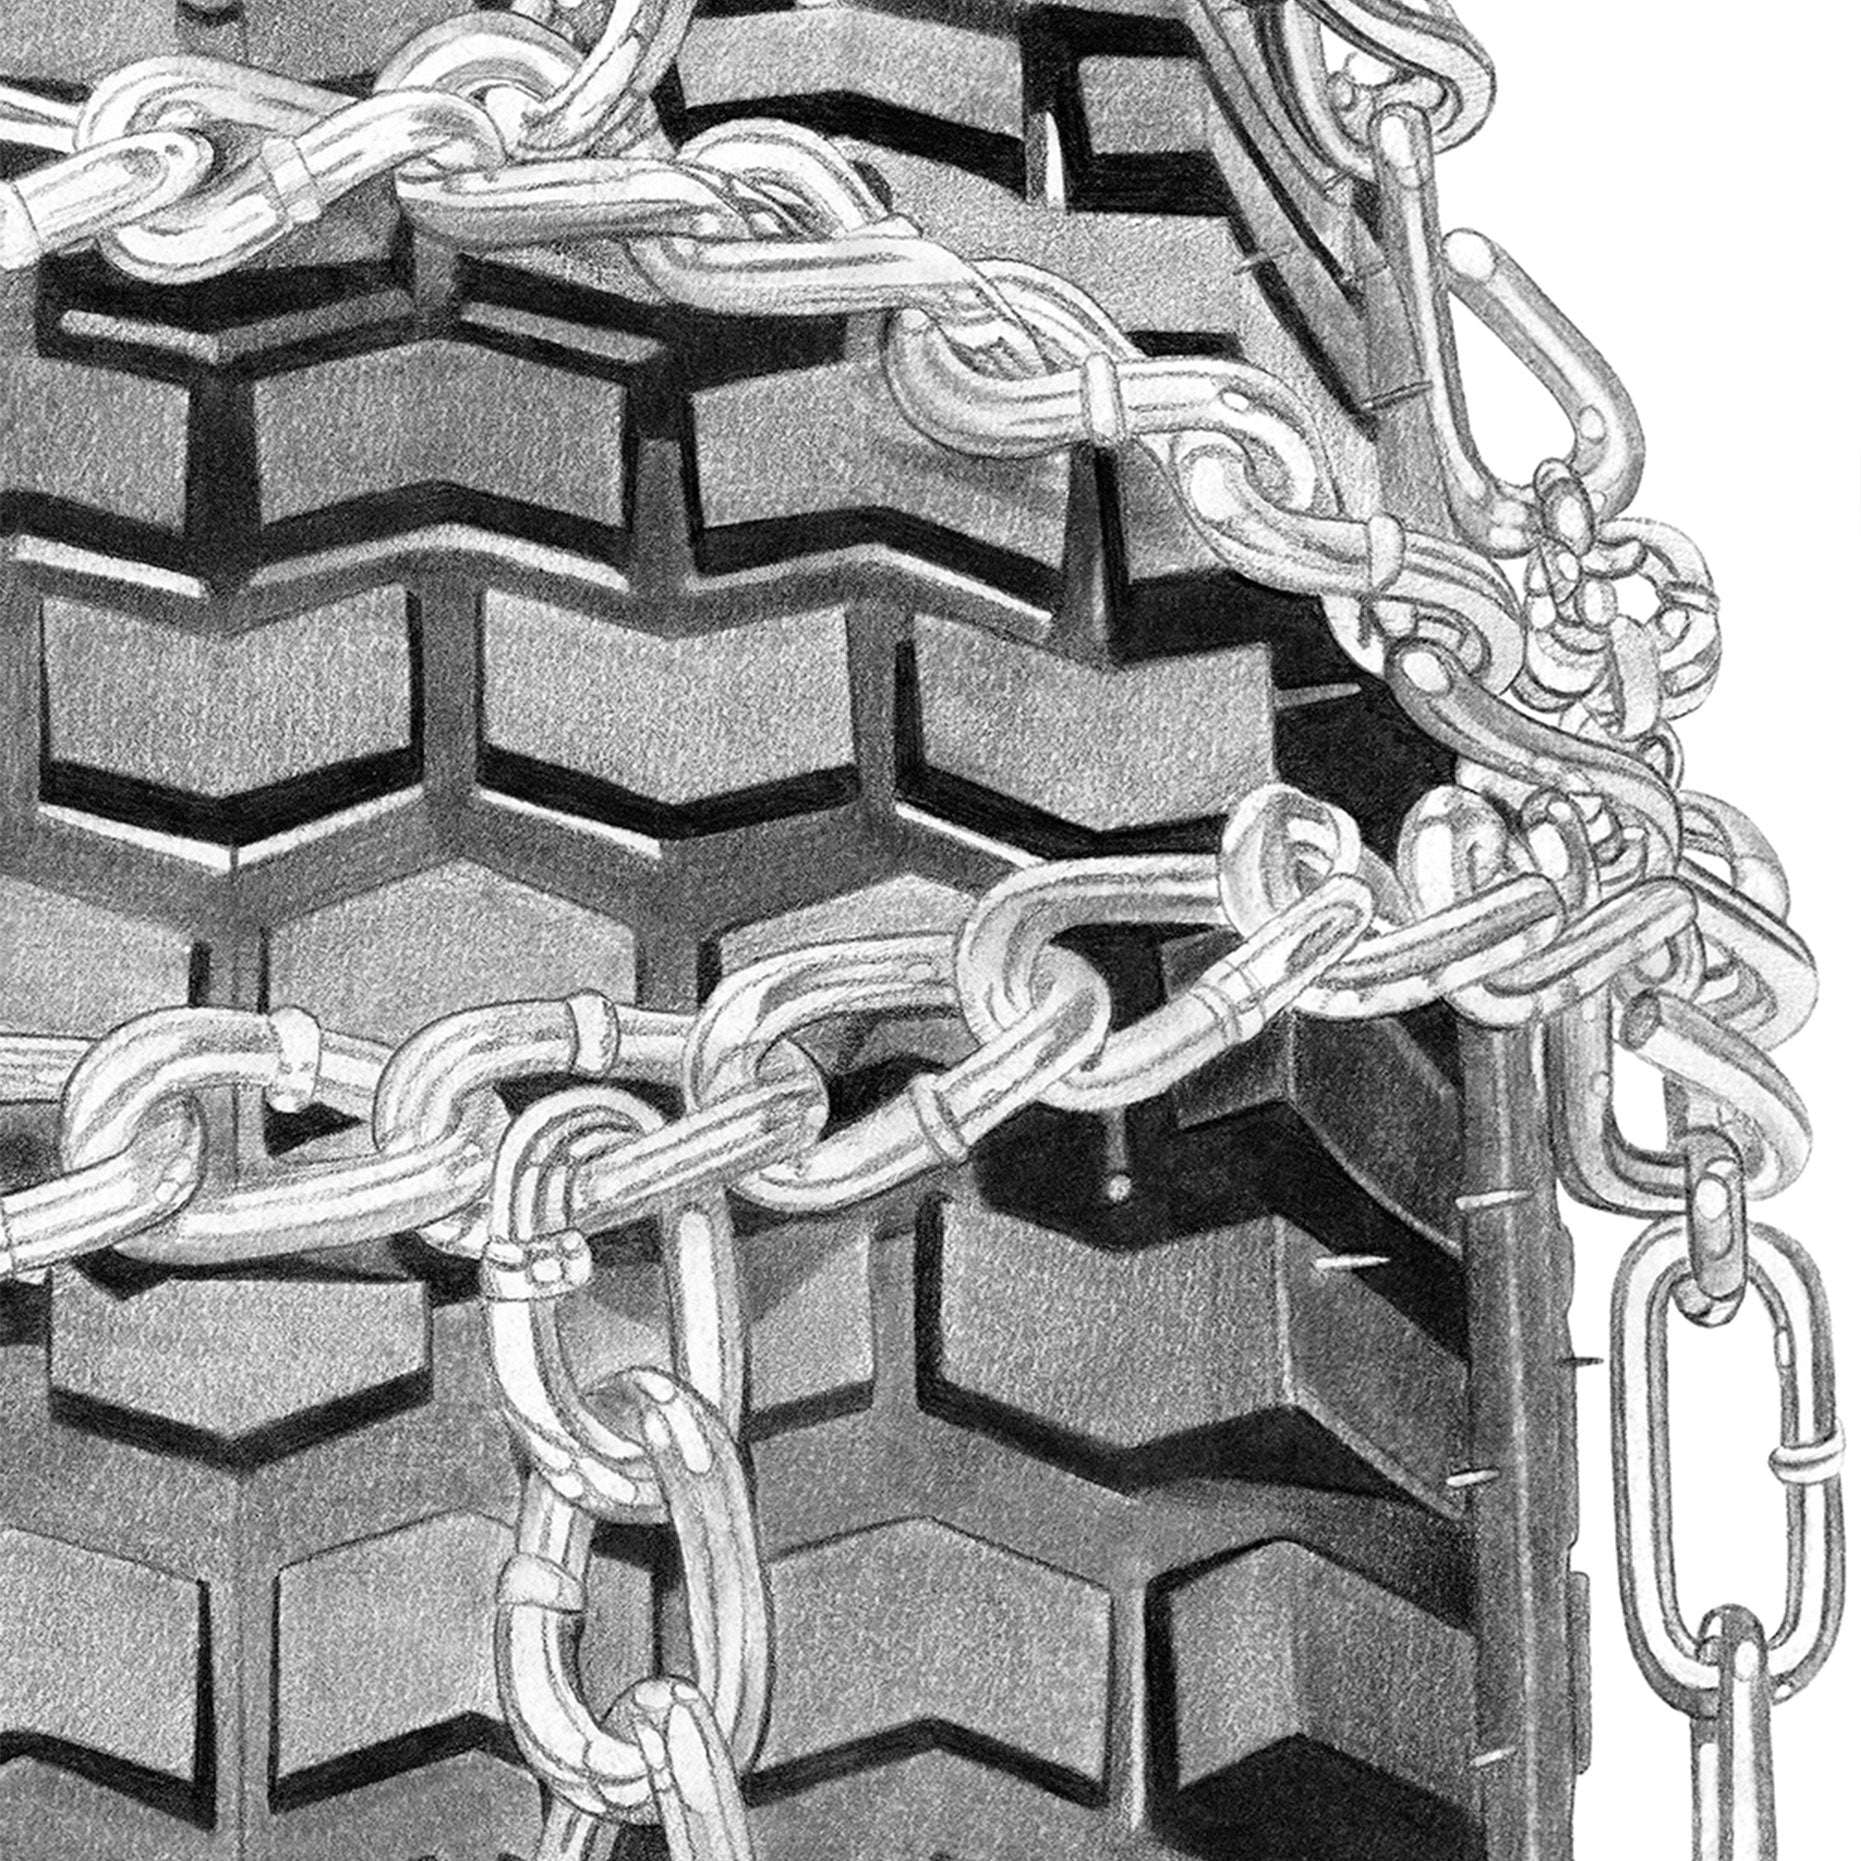 Close up of pencil drawing by Sine Jensen depicting a tyre with snow chains and spikes.